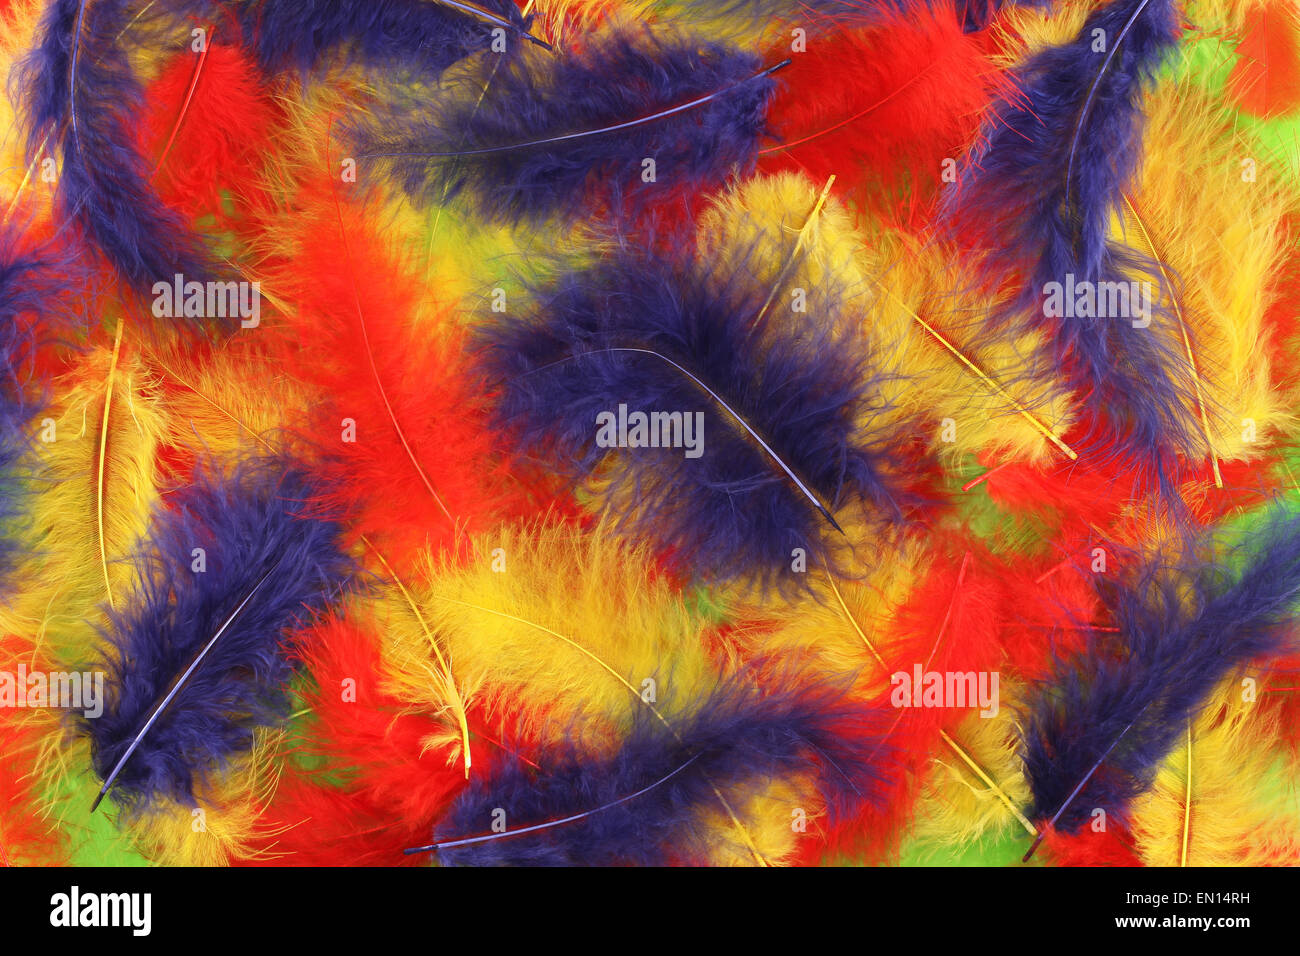 Red, blue, yellow, green plumes background Stock Photo